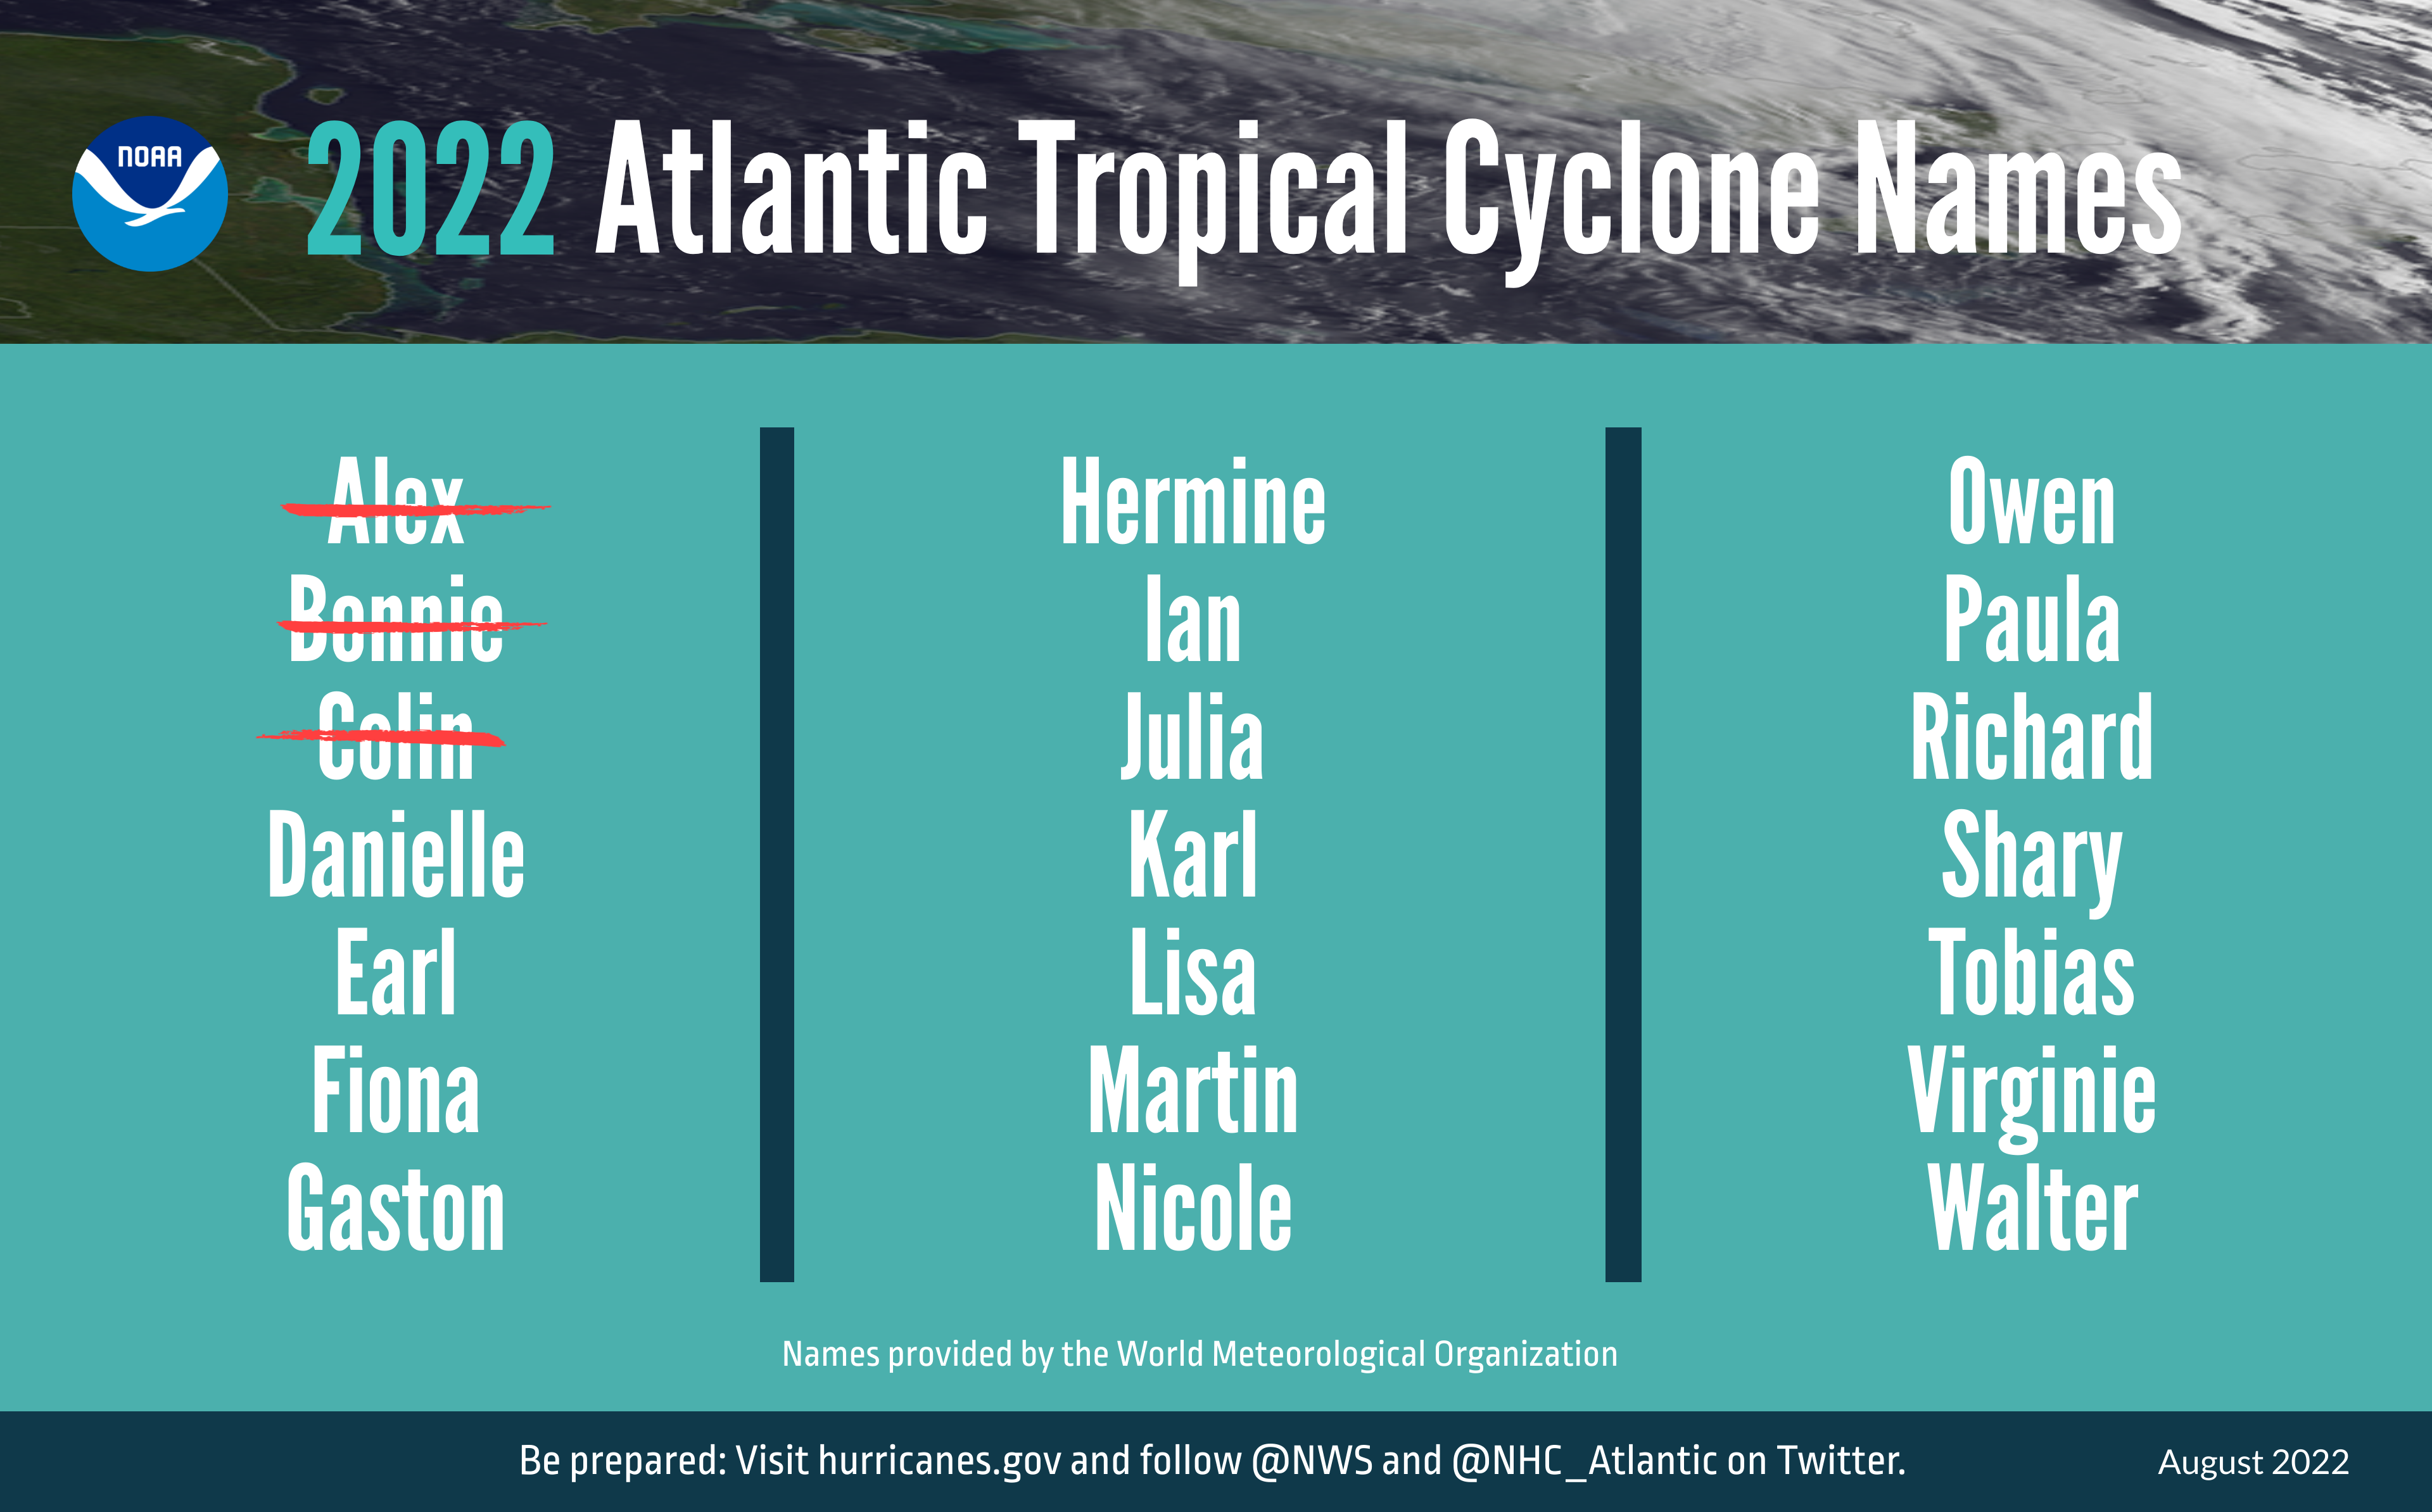 Image showing the The 2022 Atlantic tropical cyclone names selected by the World Meteorological Organization.